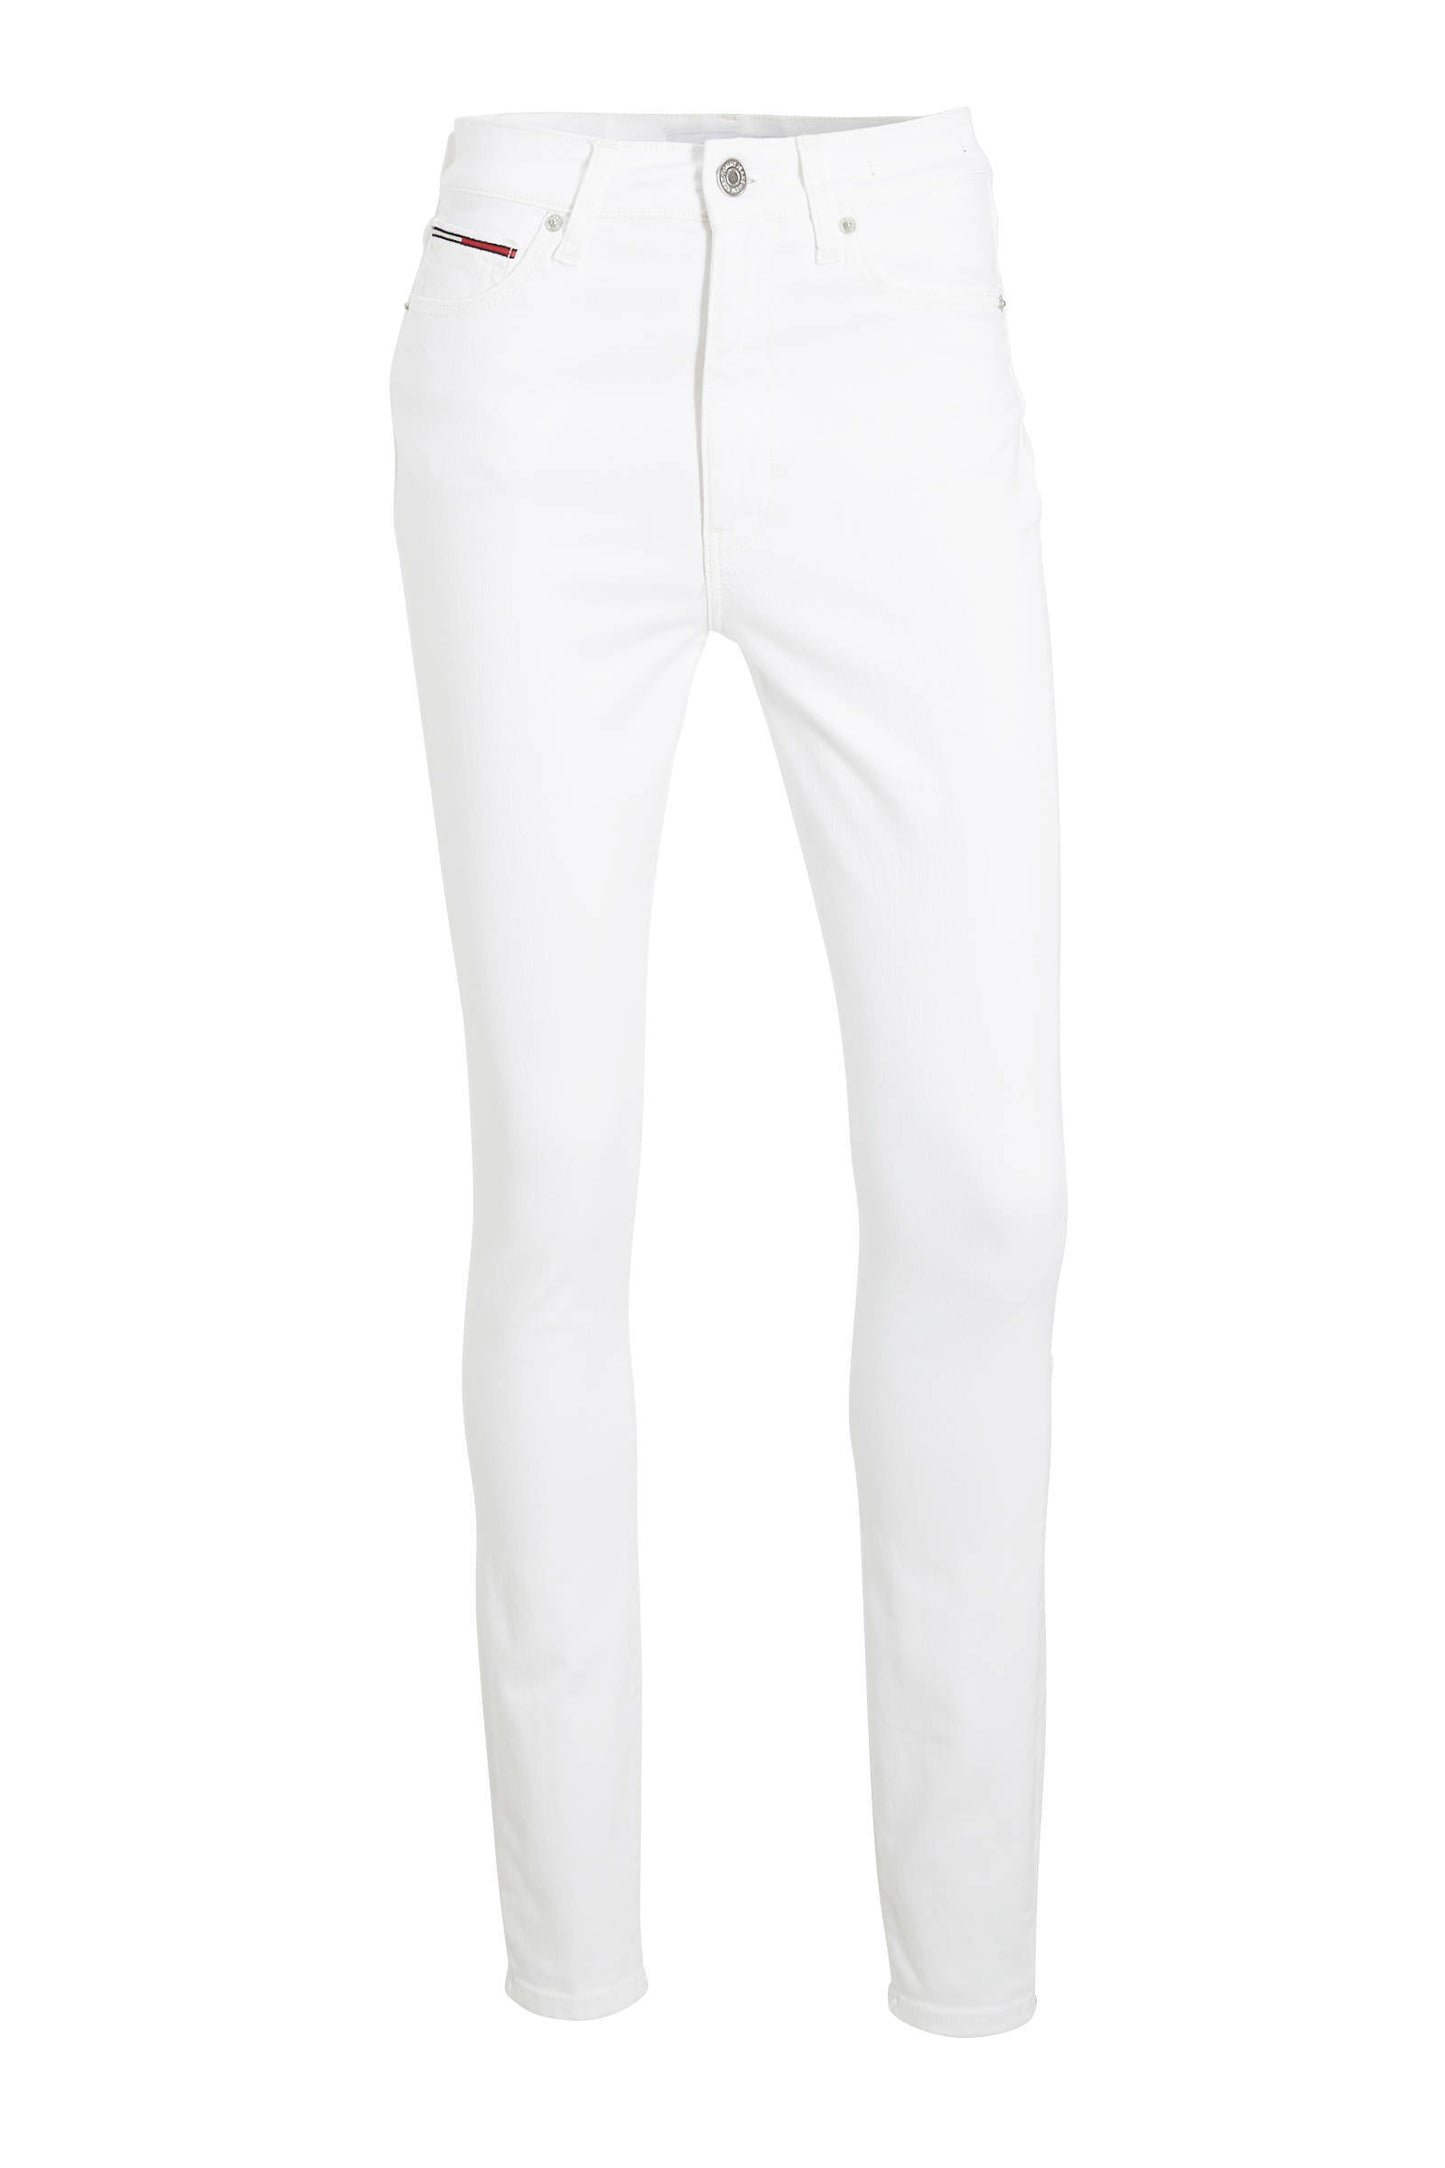 TOMMY JEANS, WOMEN'S WHITE SYLVIA JEANS 